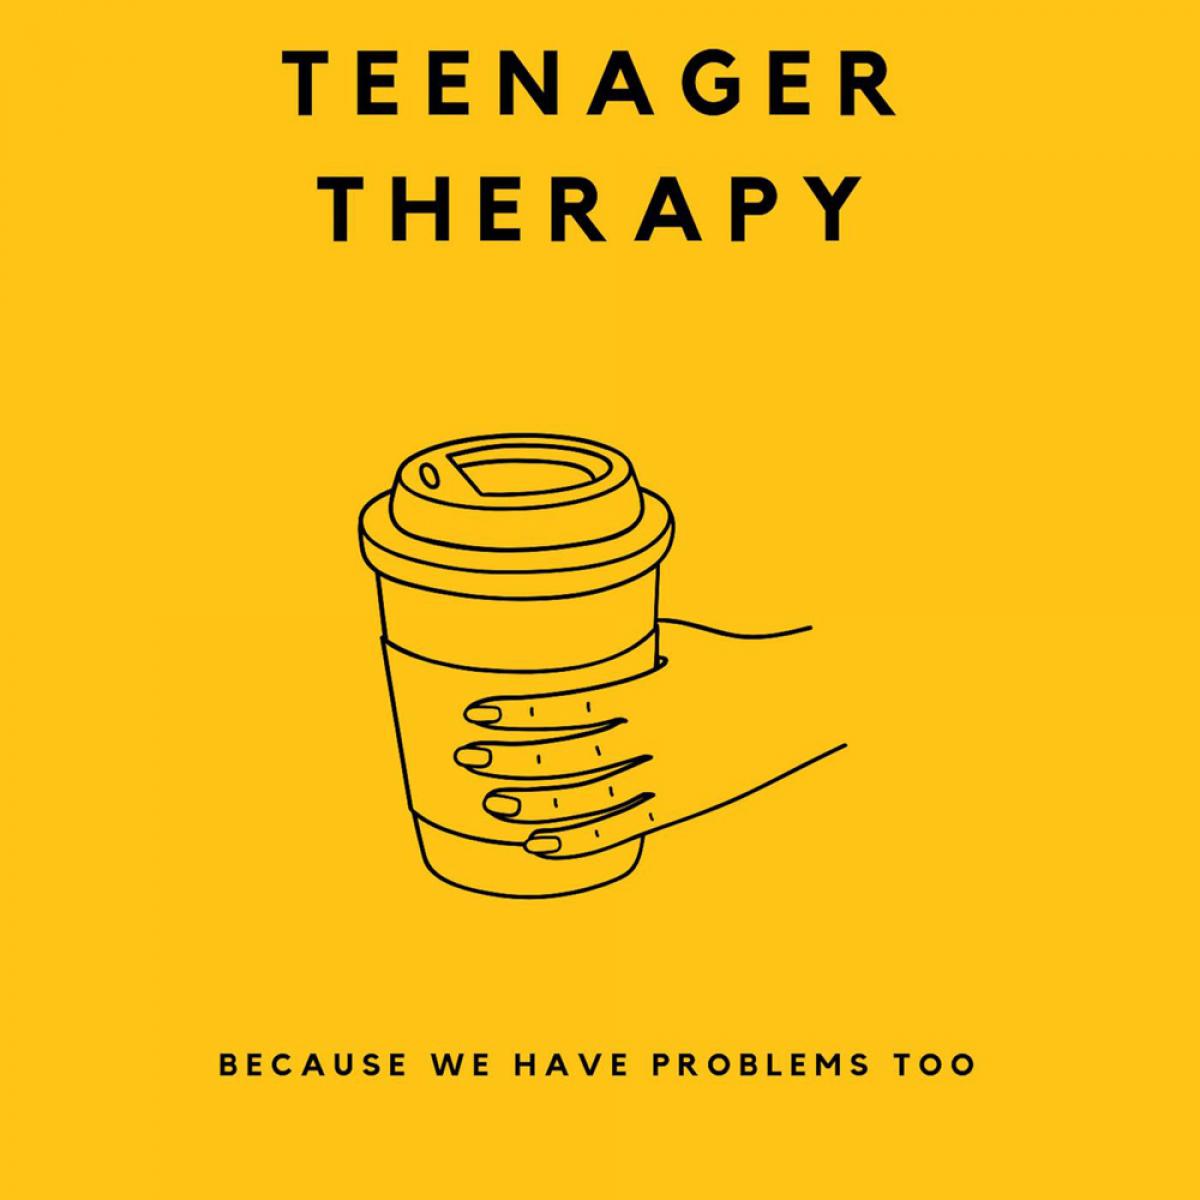 6. Teenager Therapy